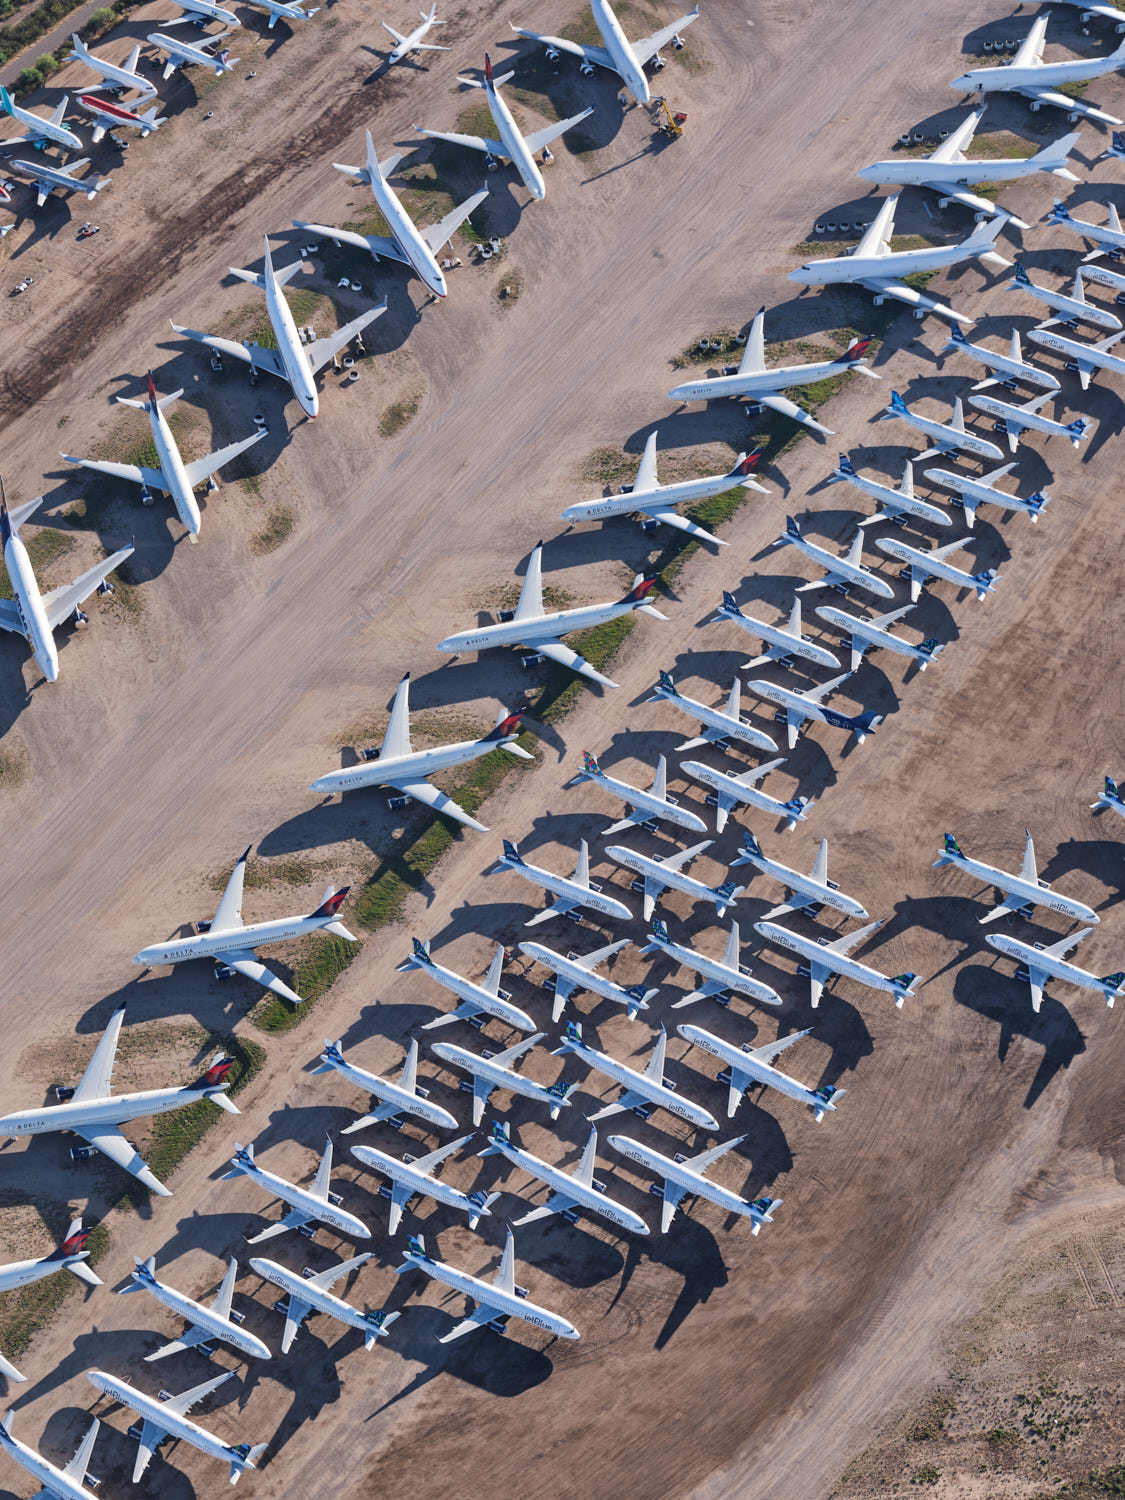 an aerial view of airplanes parked on dirt